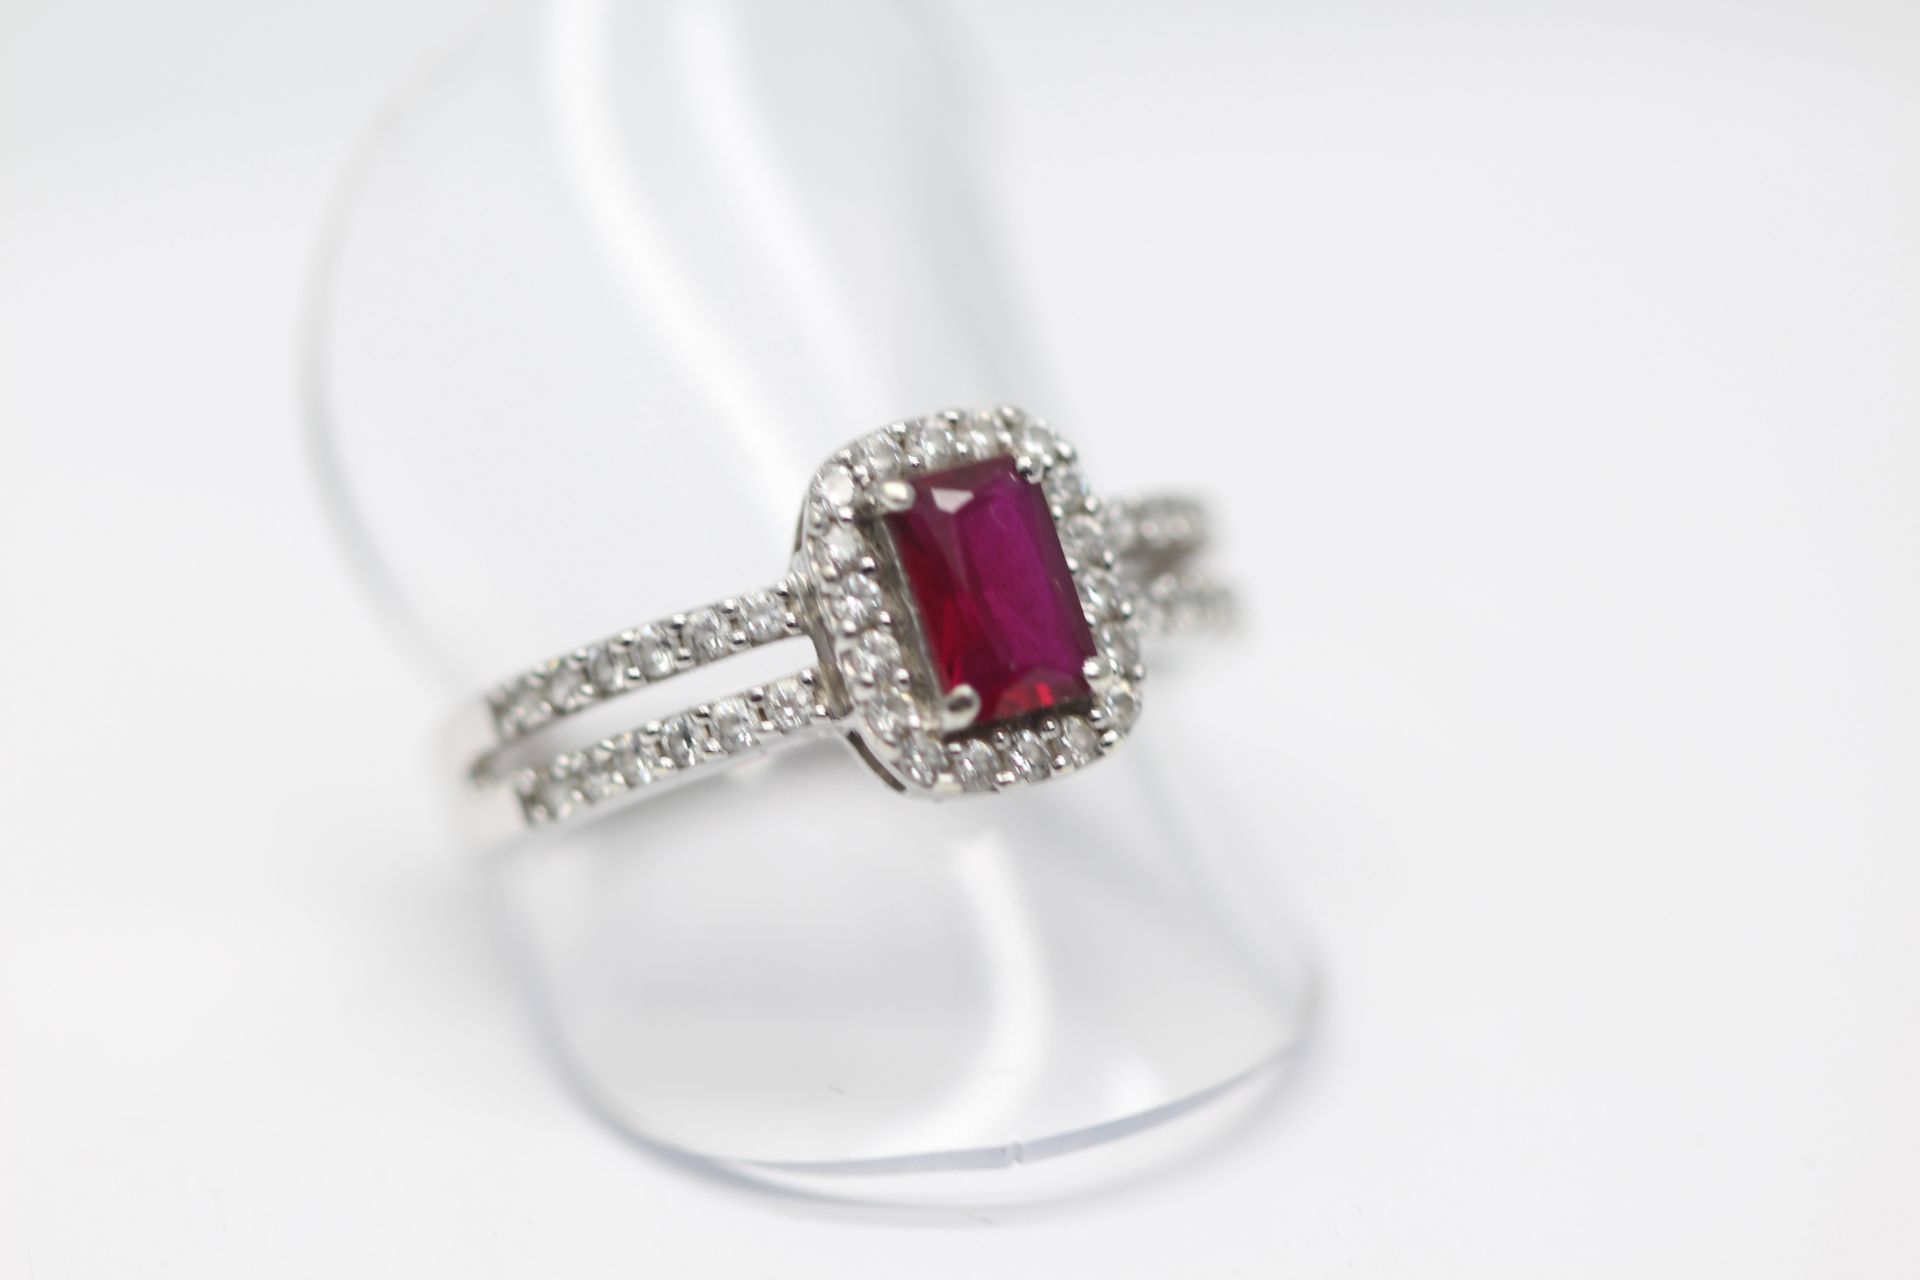 SOLID WHITE GOLD LADIES RING SET WITH A SINGLE EMERALD CUT NATURAL RED RUBY WITH DIAMONDS (PV-JH) - Image 2 of 3